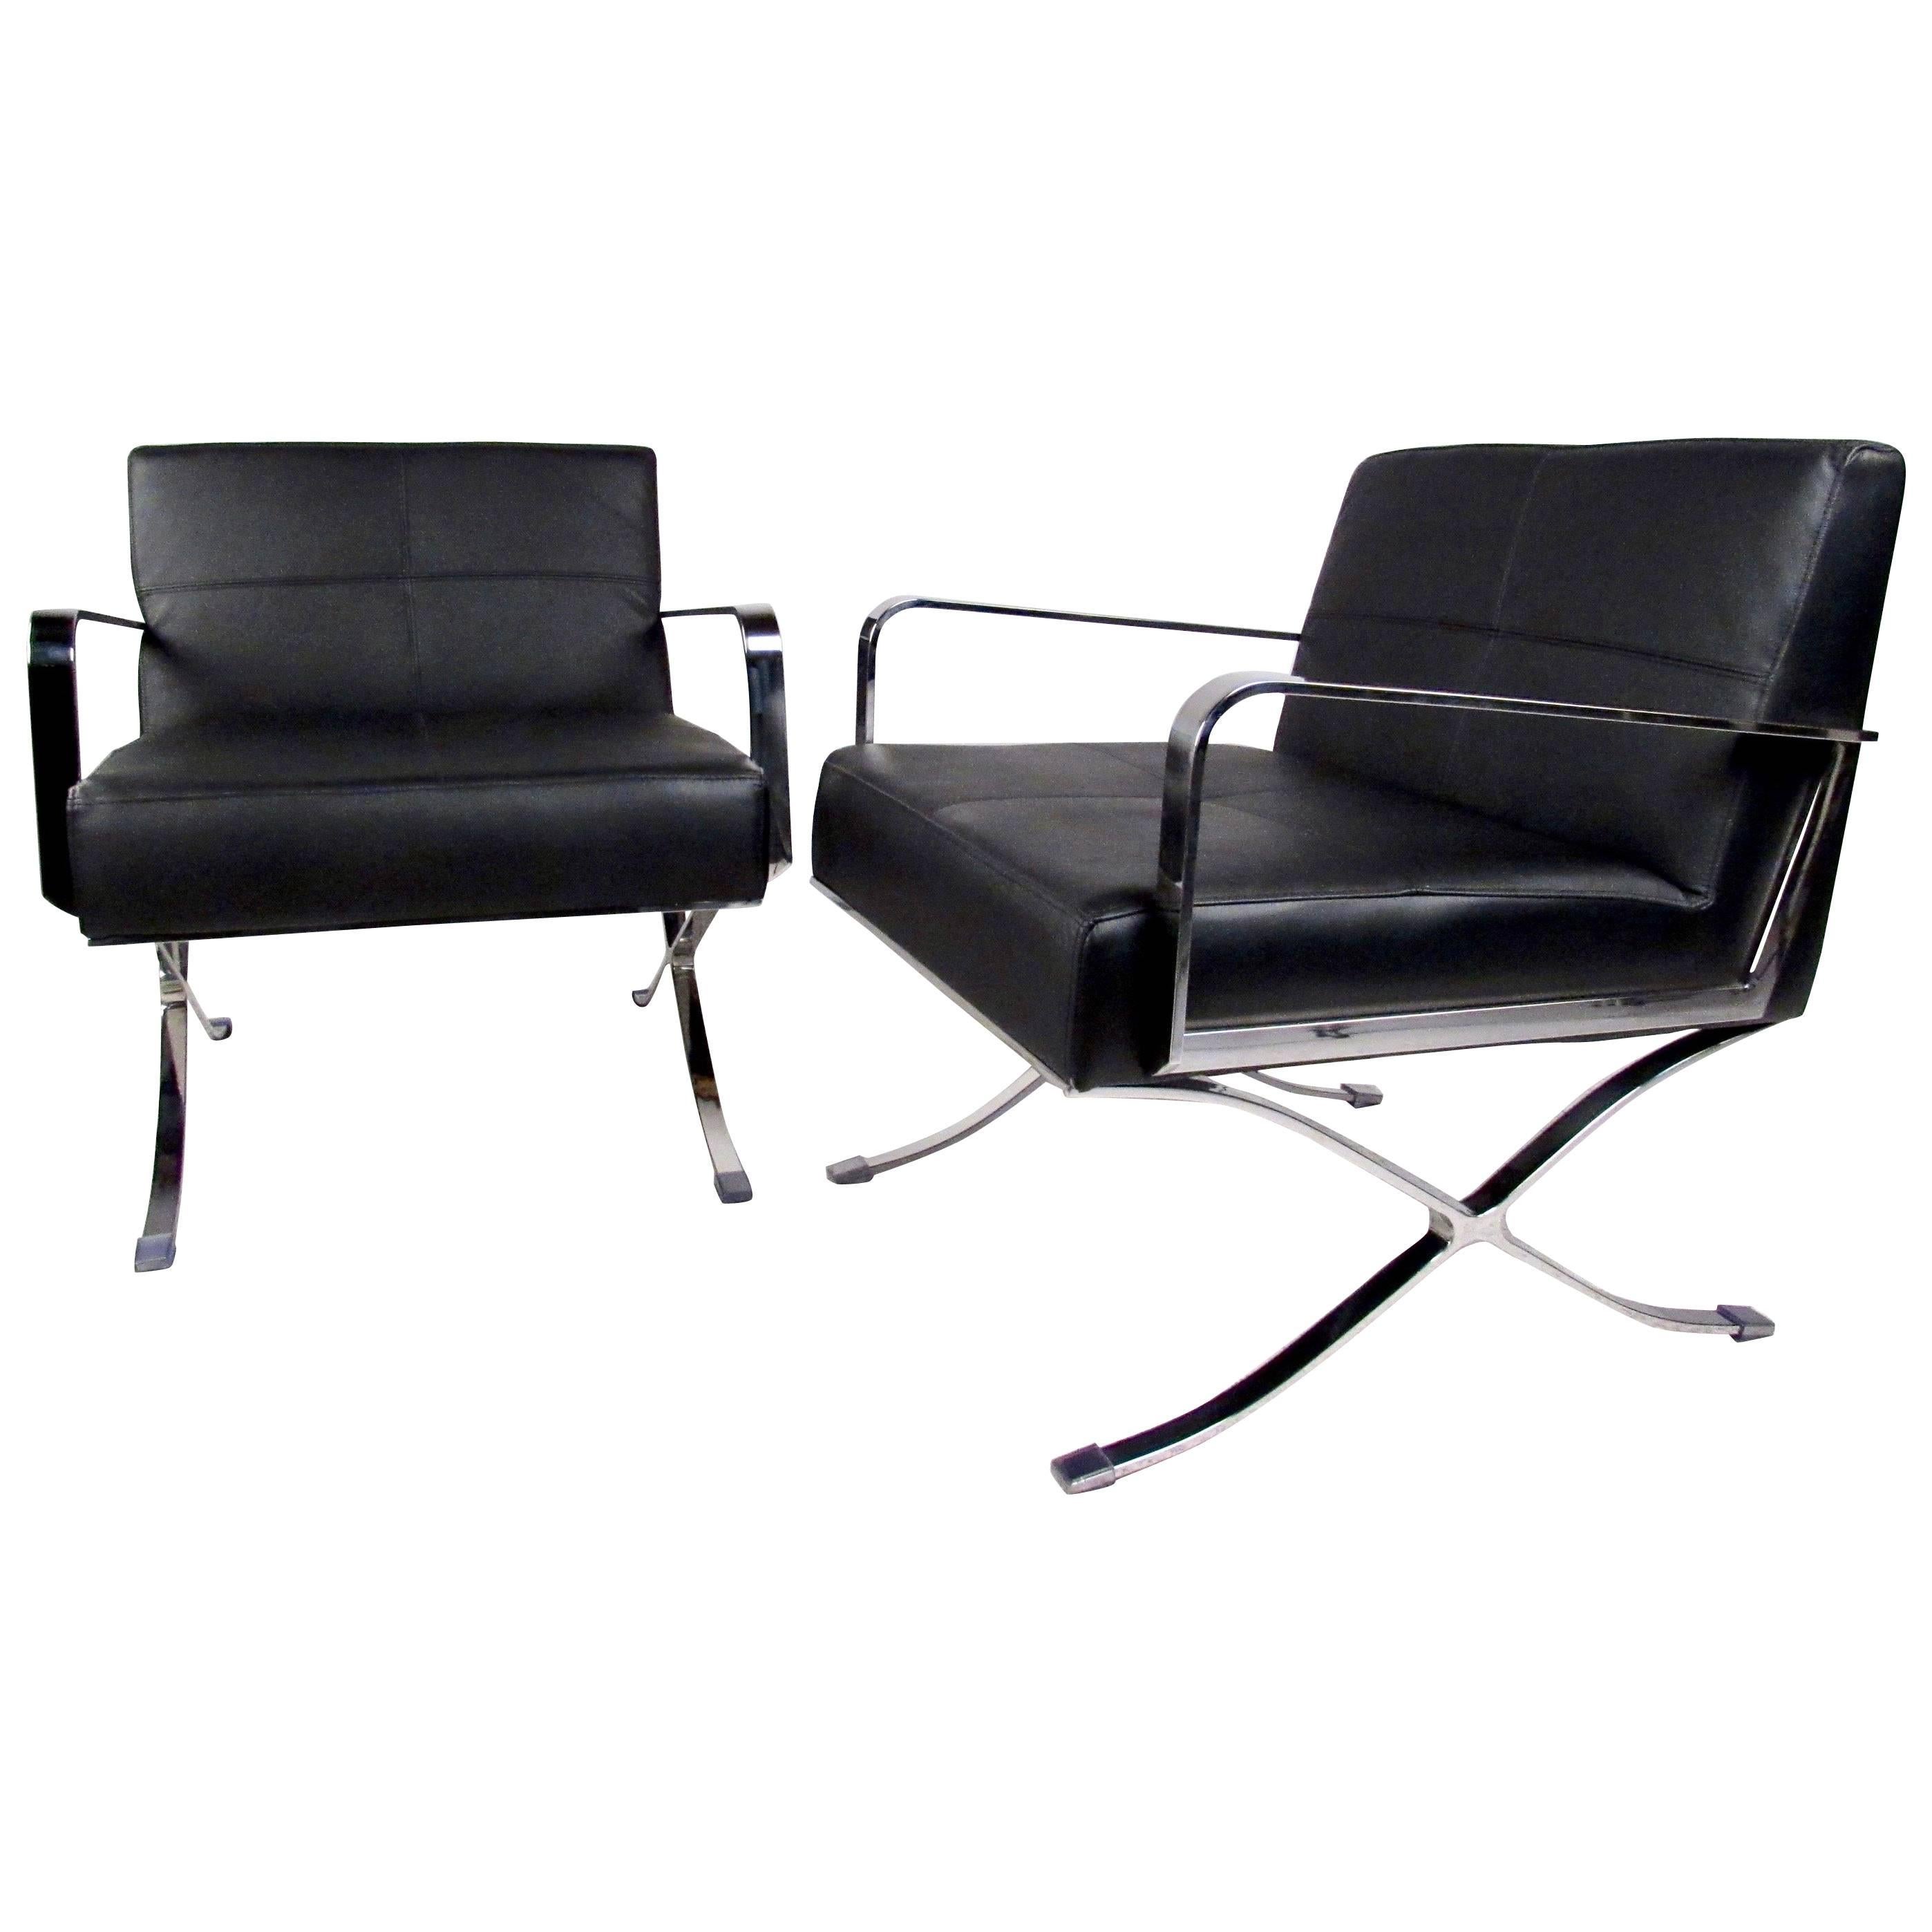 Pair of Modern Club Chairs with X Frame Base